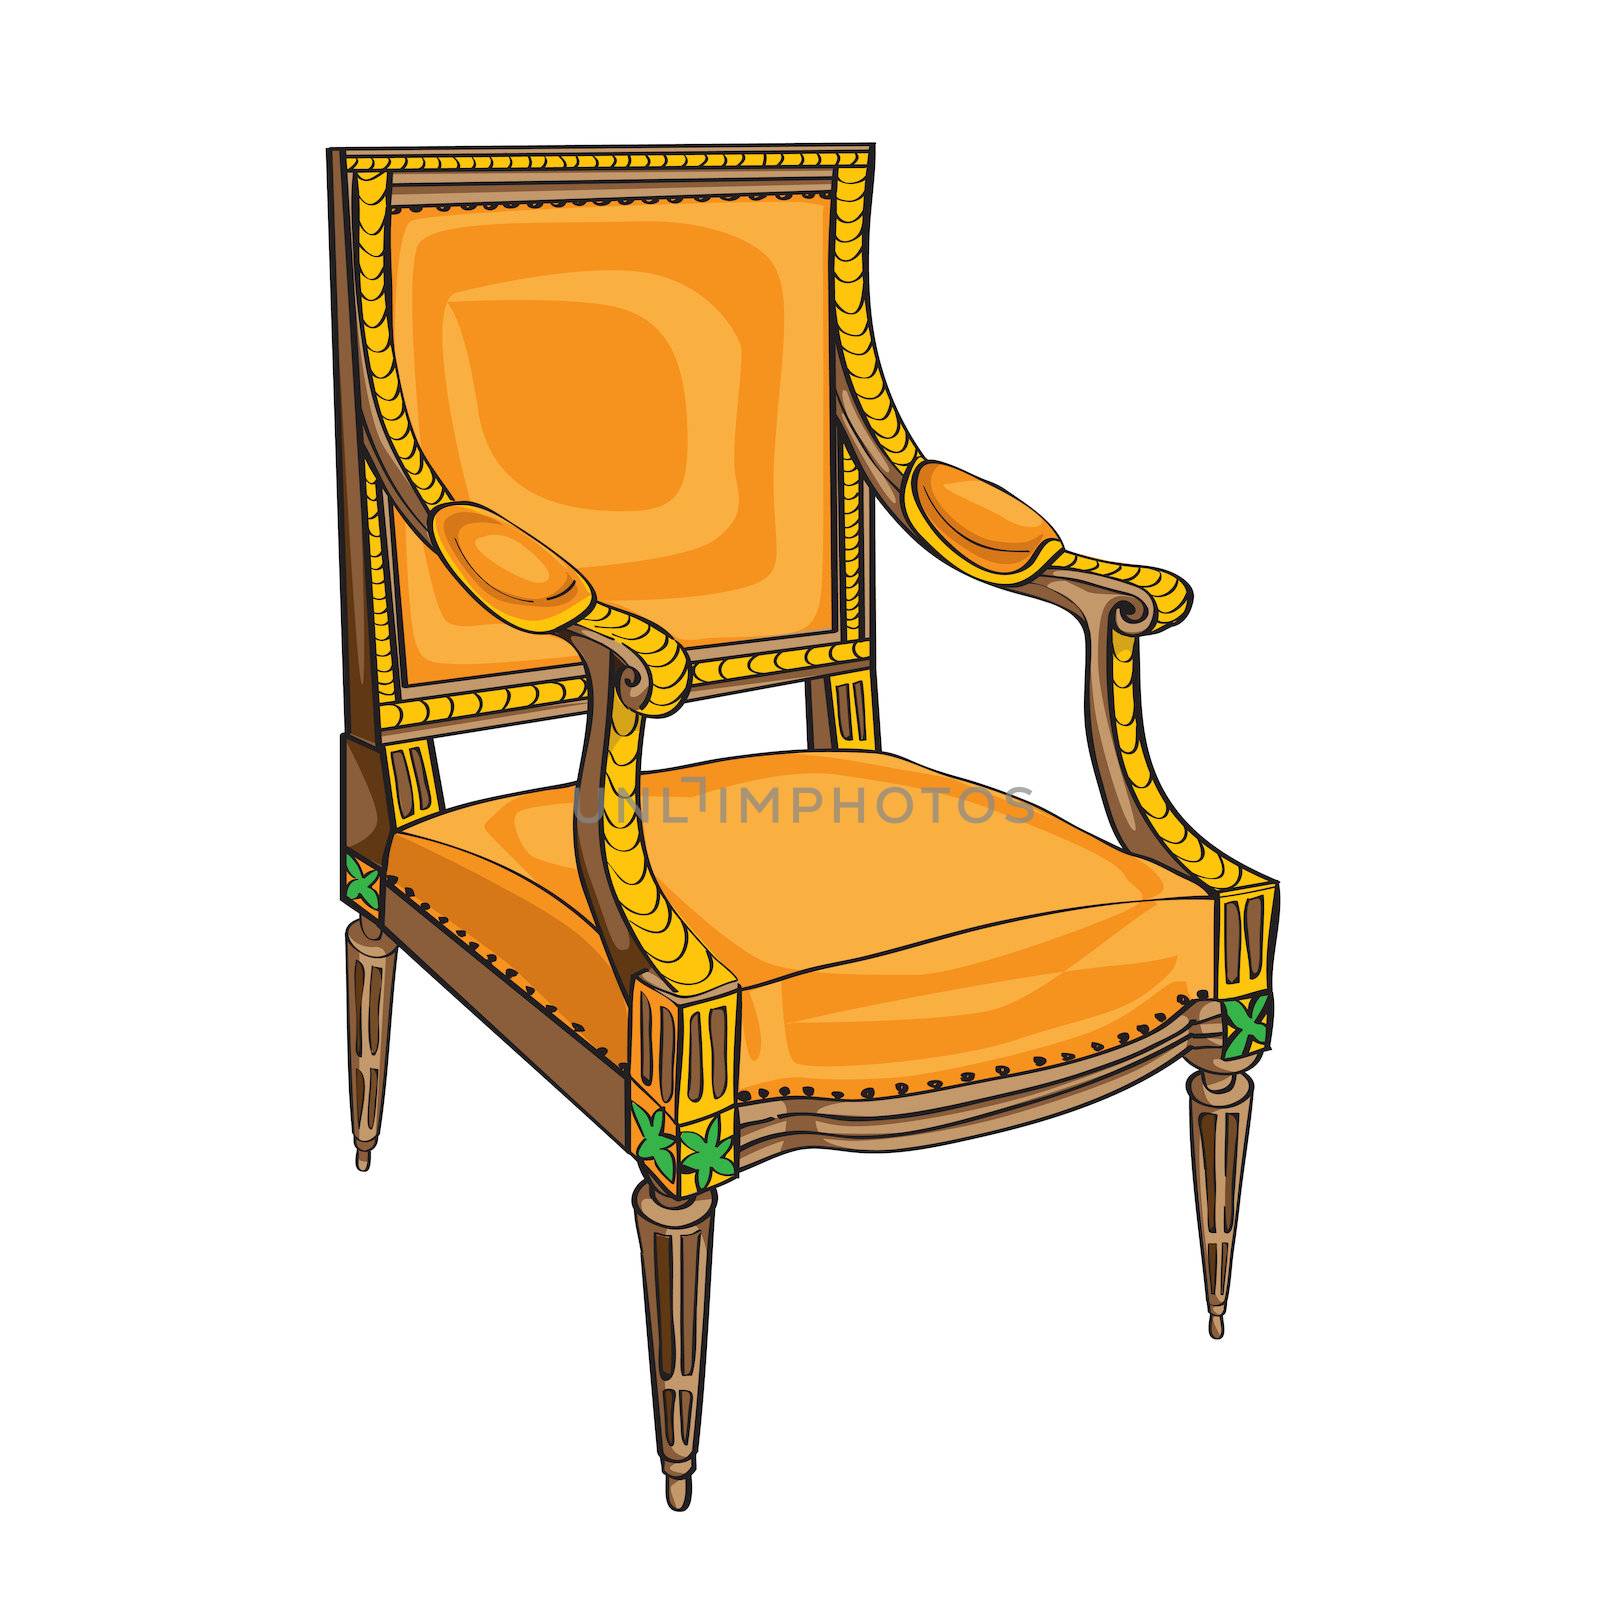 Classical style chair hand drawn illustration, doodle over a white background